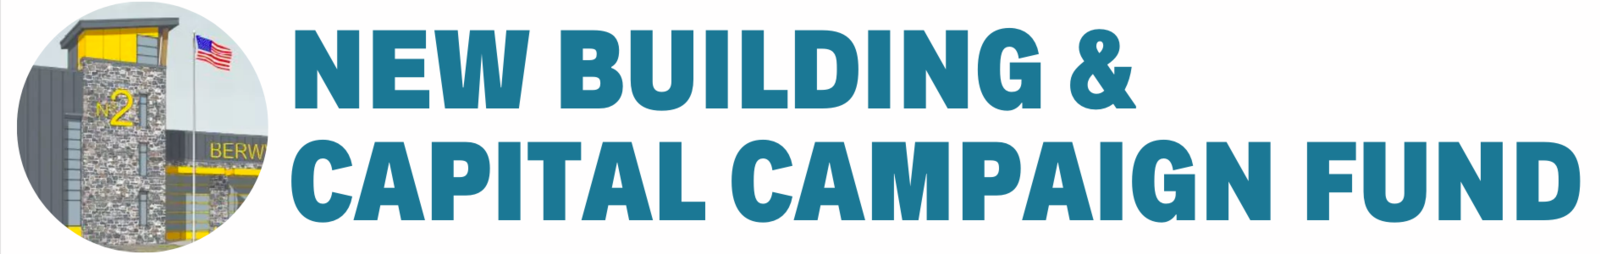 Donate to New Building Capital Campaign Today!